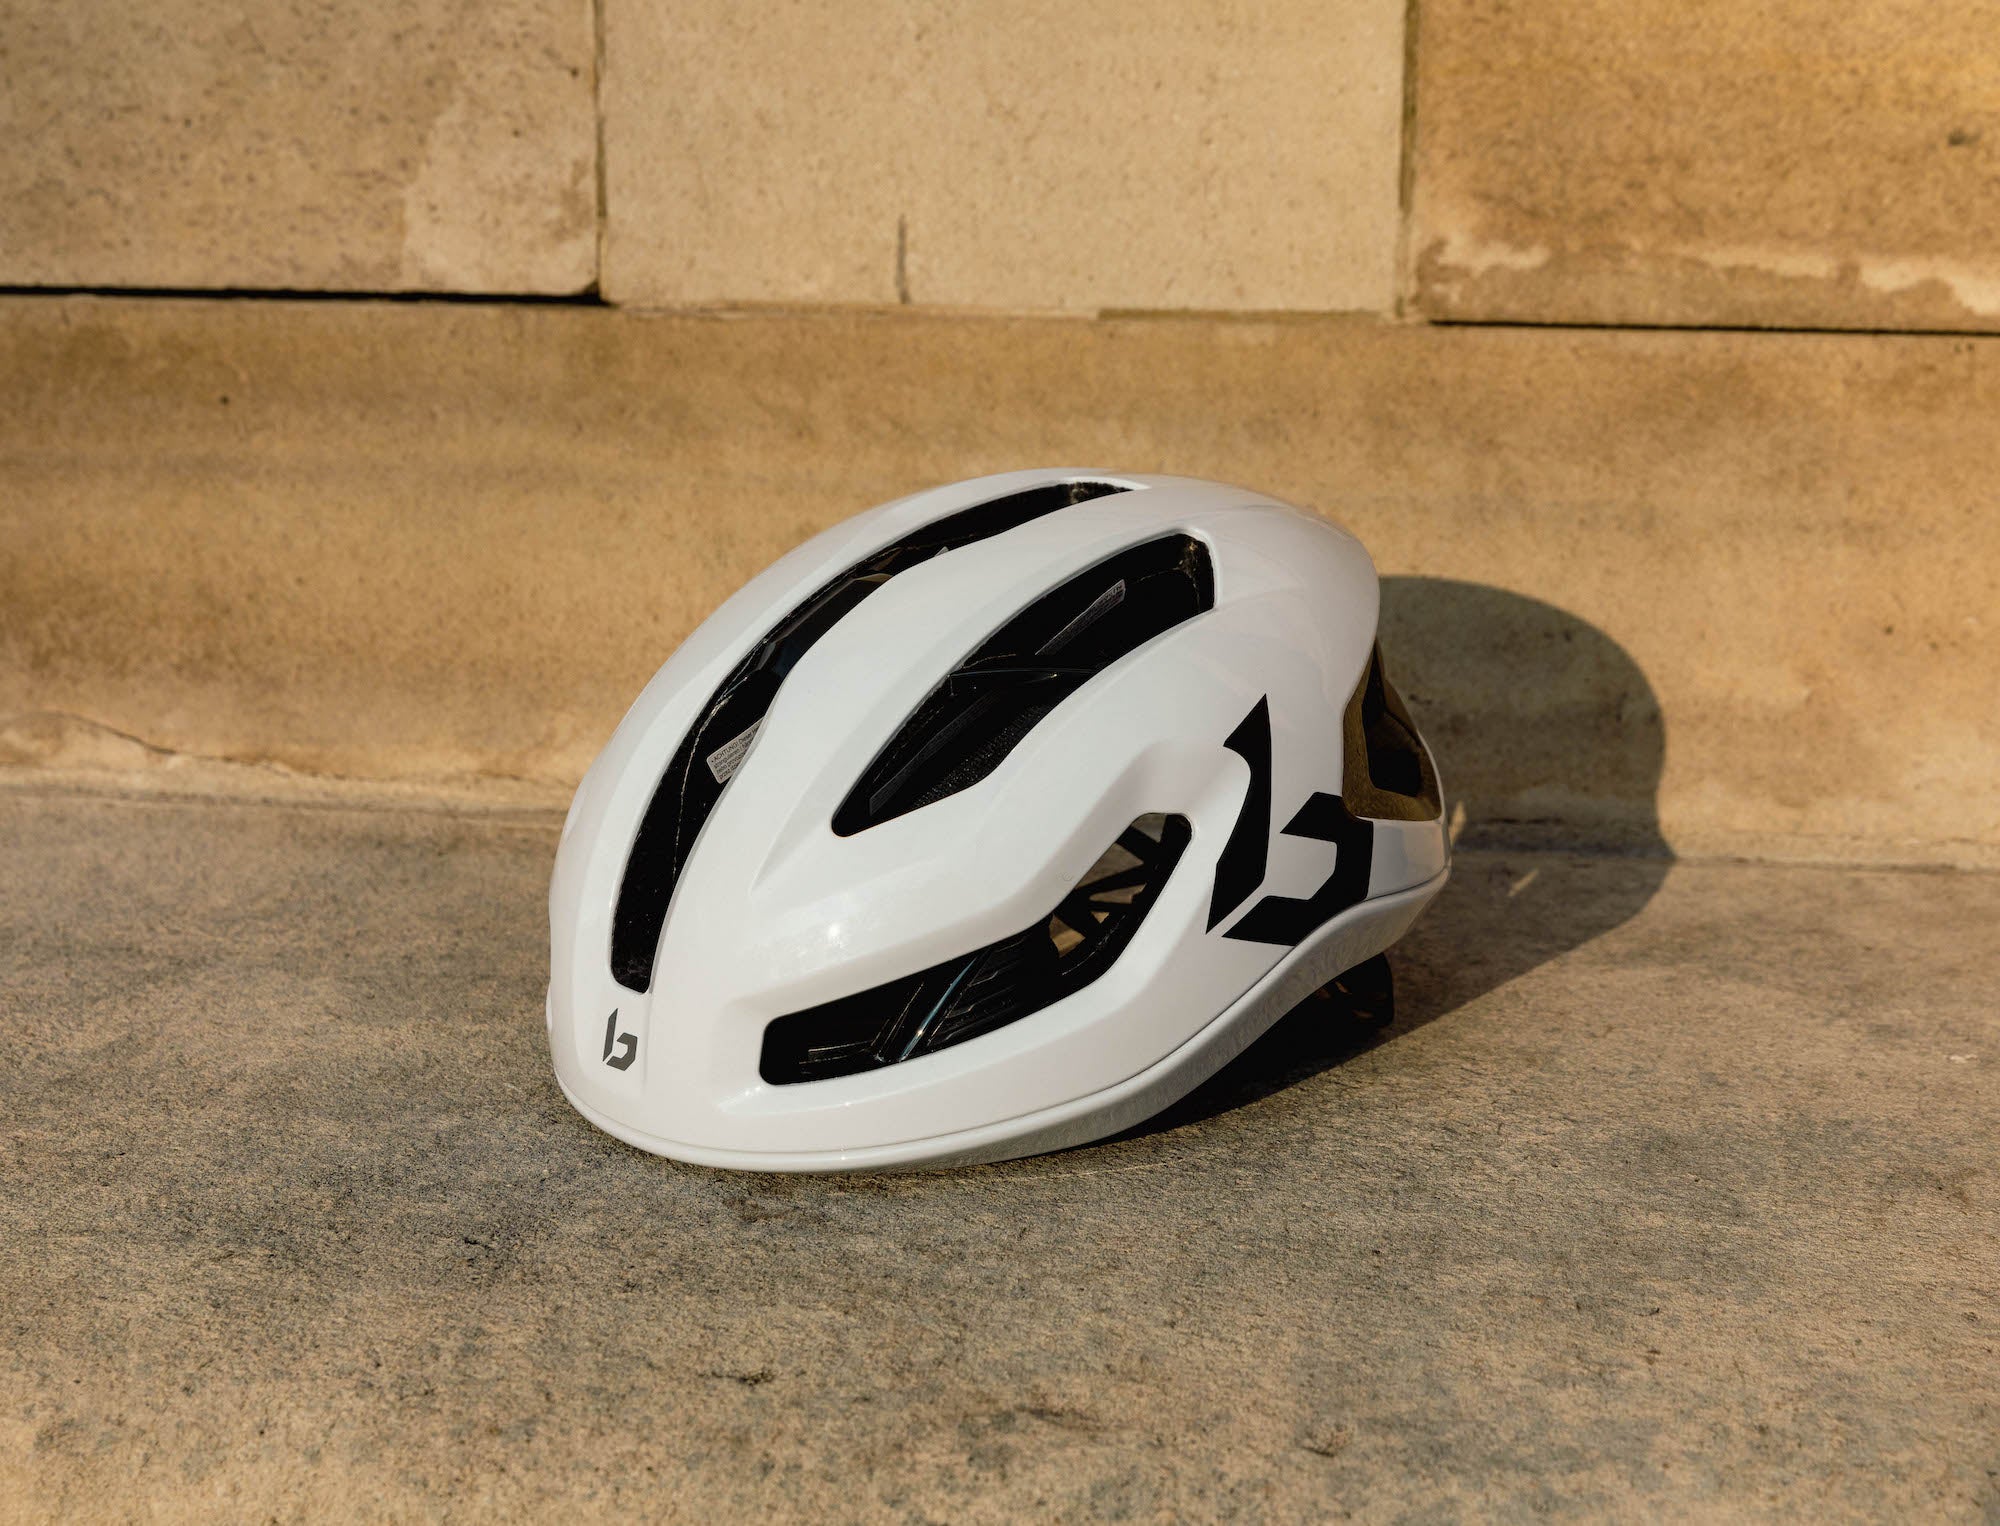 The best cycling helmets